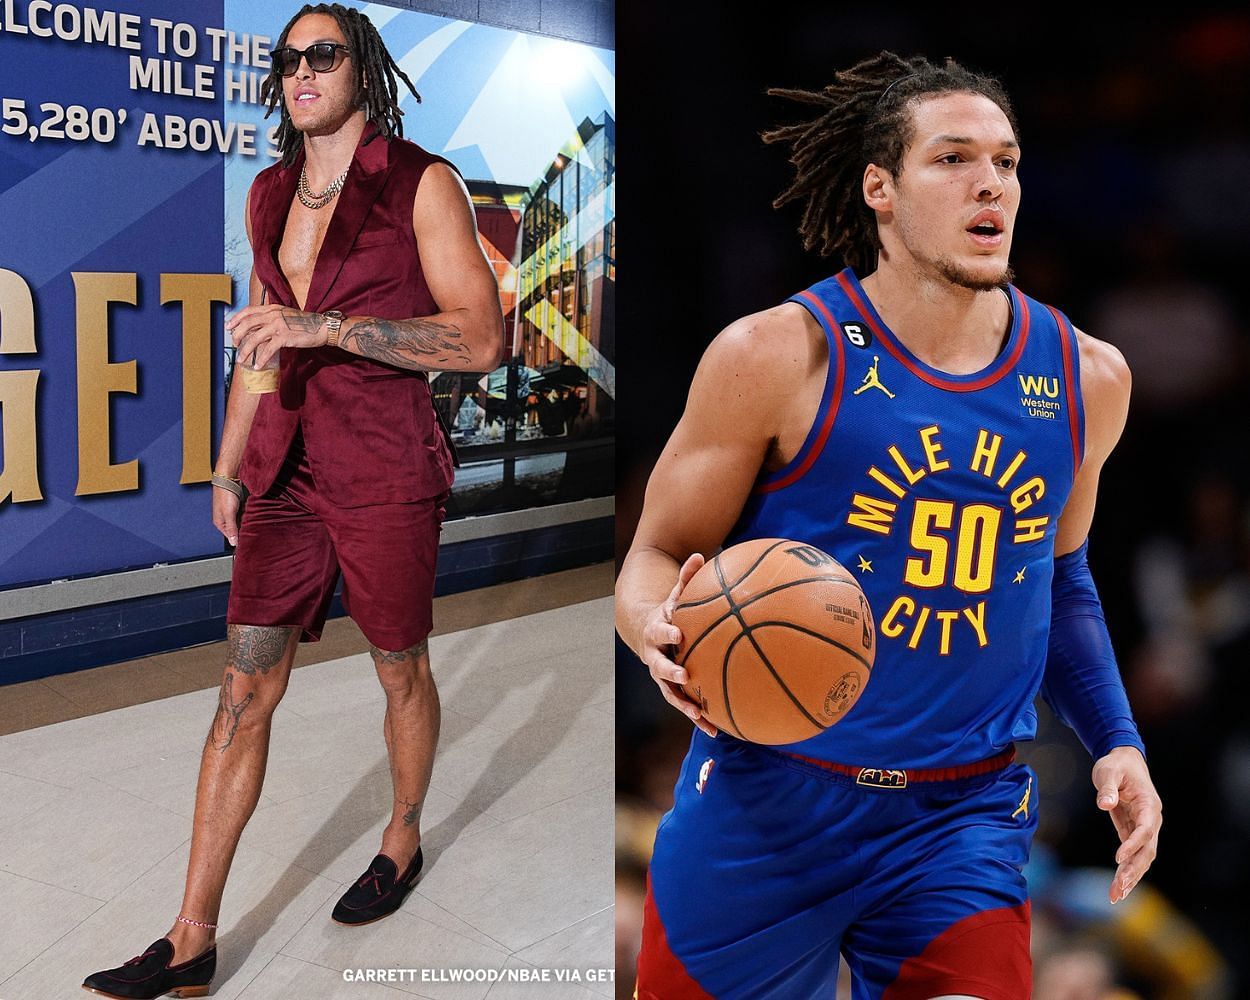 Aaron Gordon pulling up to NBA Tip-Off in Aladdin-like outfit